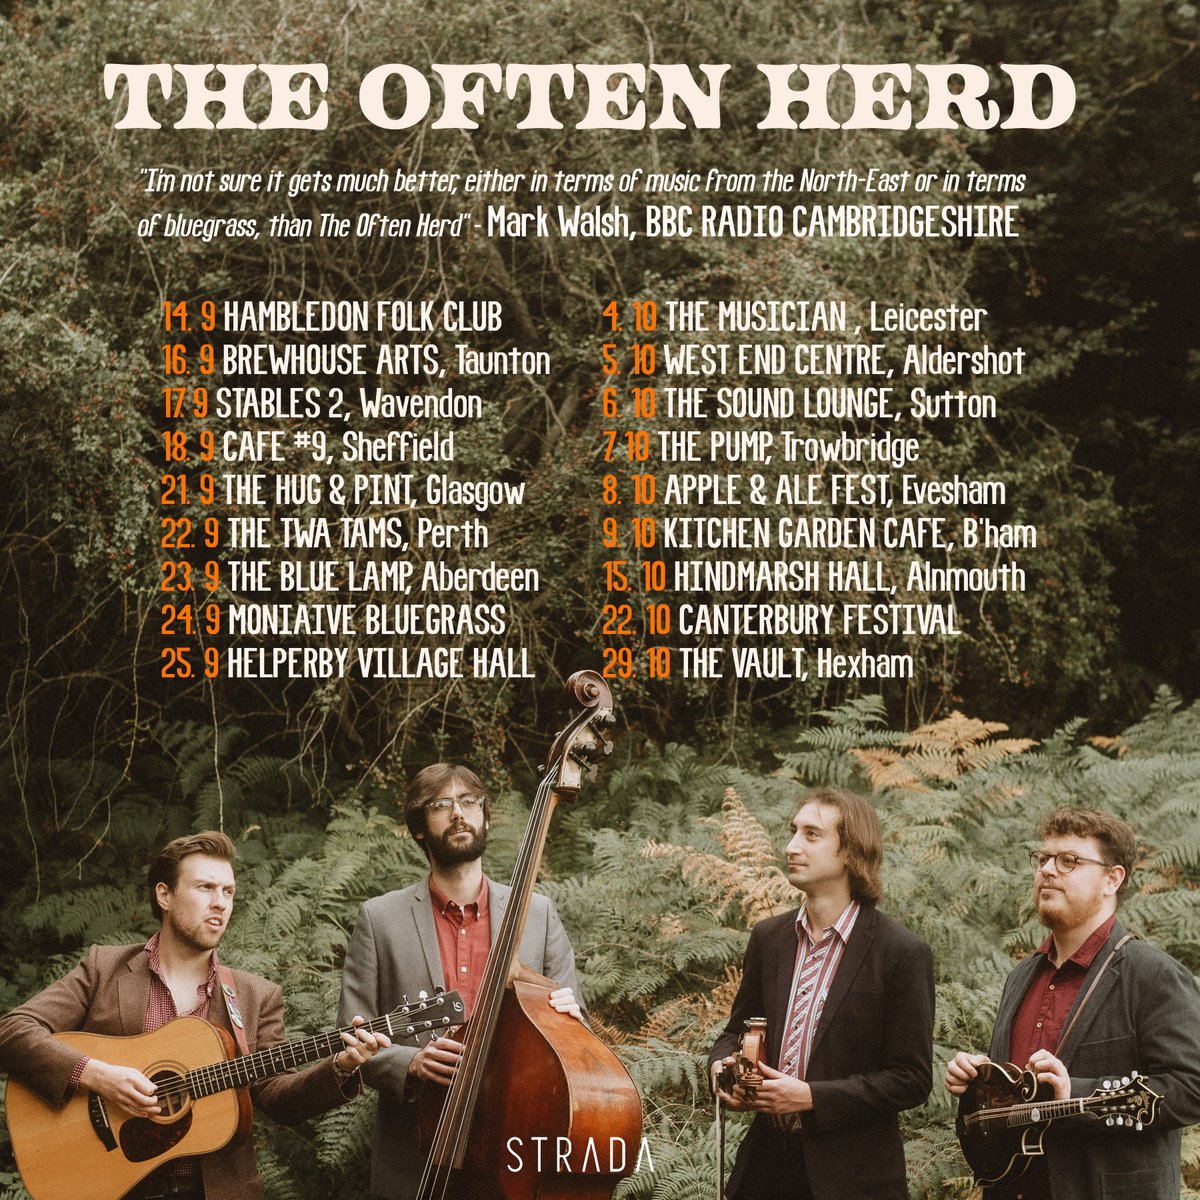 🍂 AUTUMN TOUR 🍂 Can't wait to hit all of these fantastic venues! Tickets here: theoftenherd.com/tour @BrewhouseLive @StablesMK @cafehash9 @thehugandpint @MusicianVenue @teamwesty @soundloungeCIC @pumptrowbridge @KitchenGarden3 @TheVaultHexham